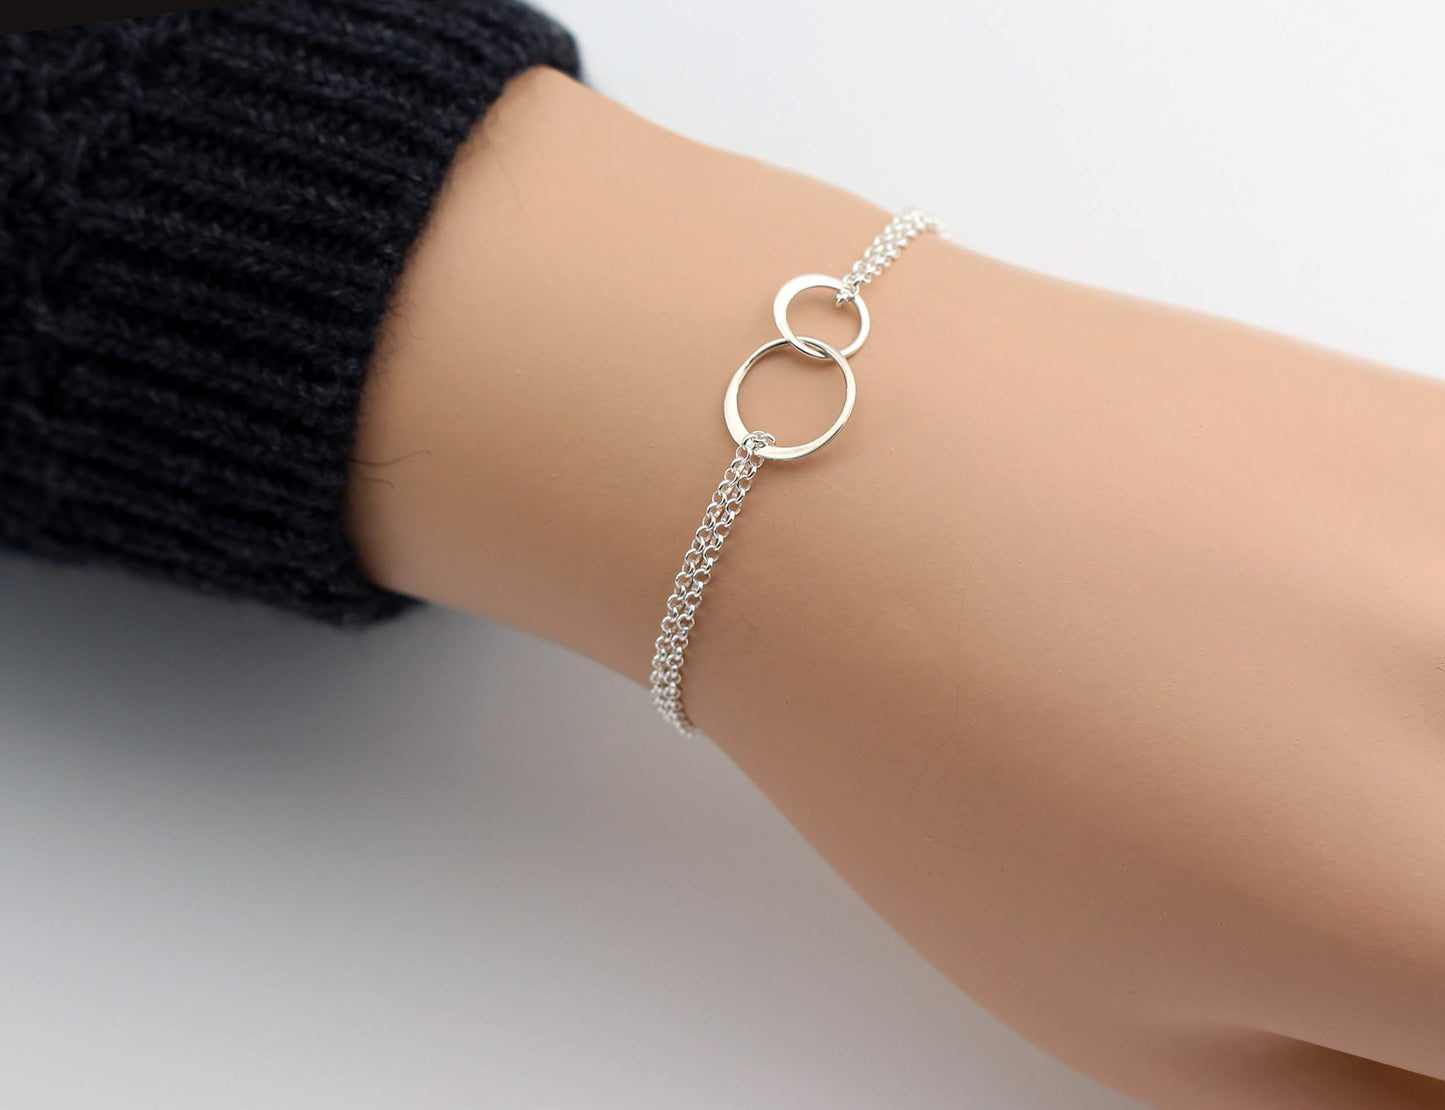 Friendship Bracelet • You Are My Person Bracelet • Love and Friendship Jewelry • Two Connected Circles • 925 Sterling Silver • You're My Tribe Unbiological Soul Sister Bracelet • Gifts for BFF Besties